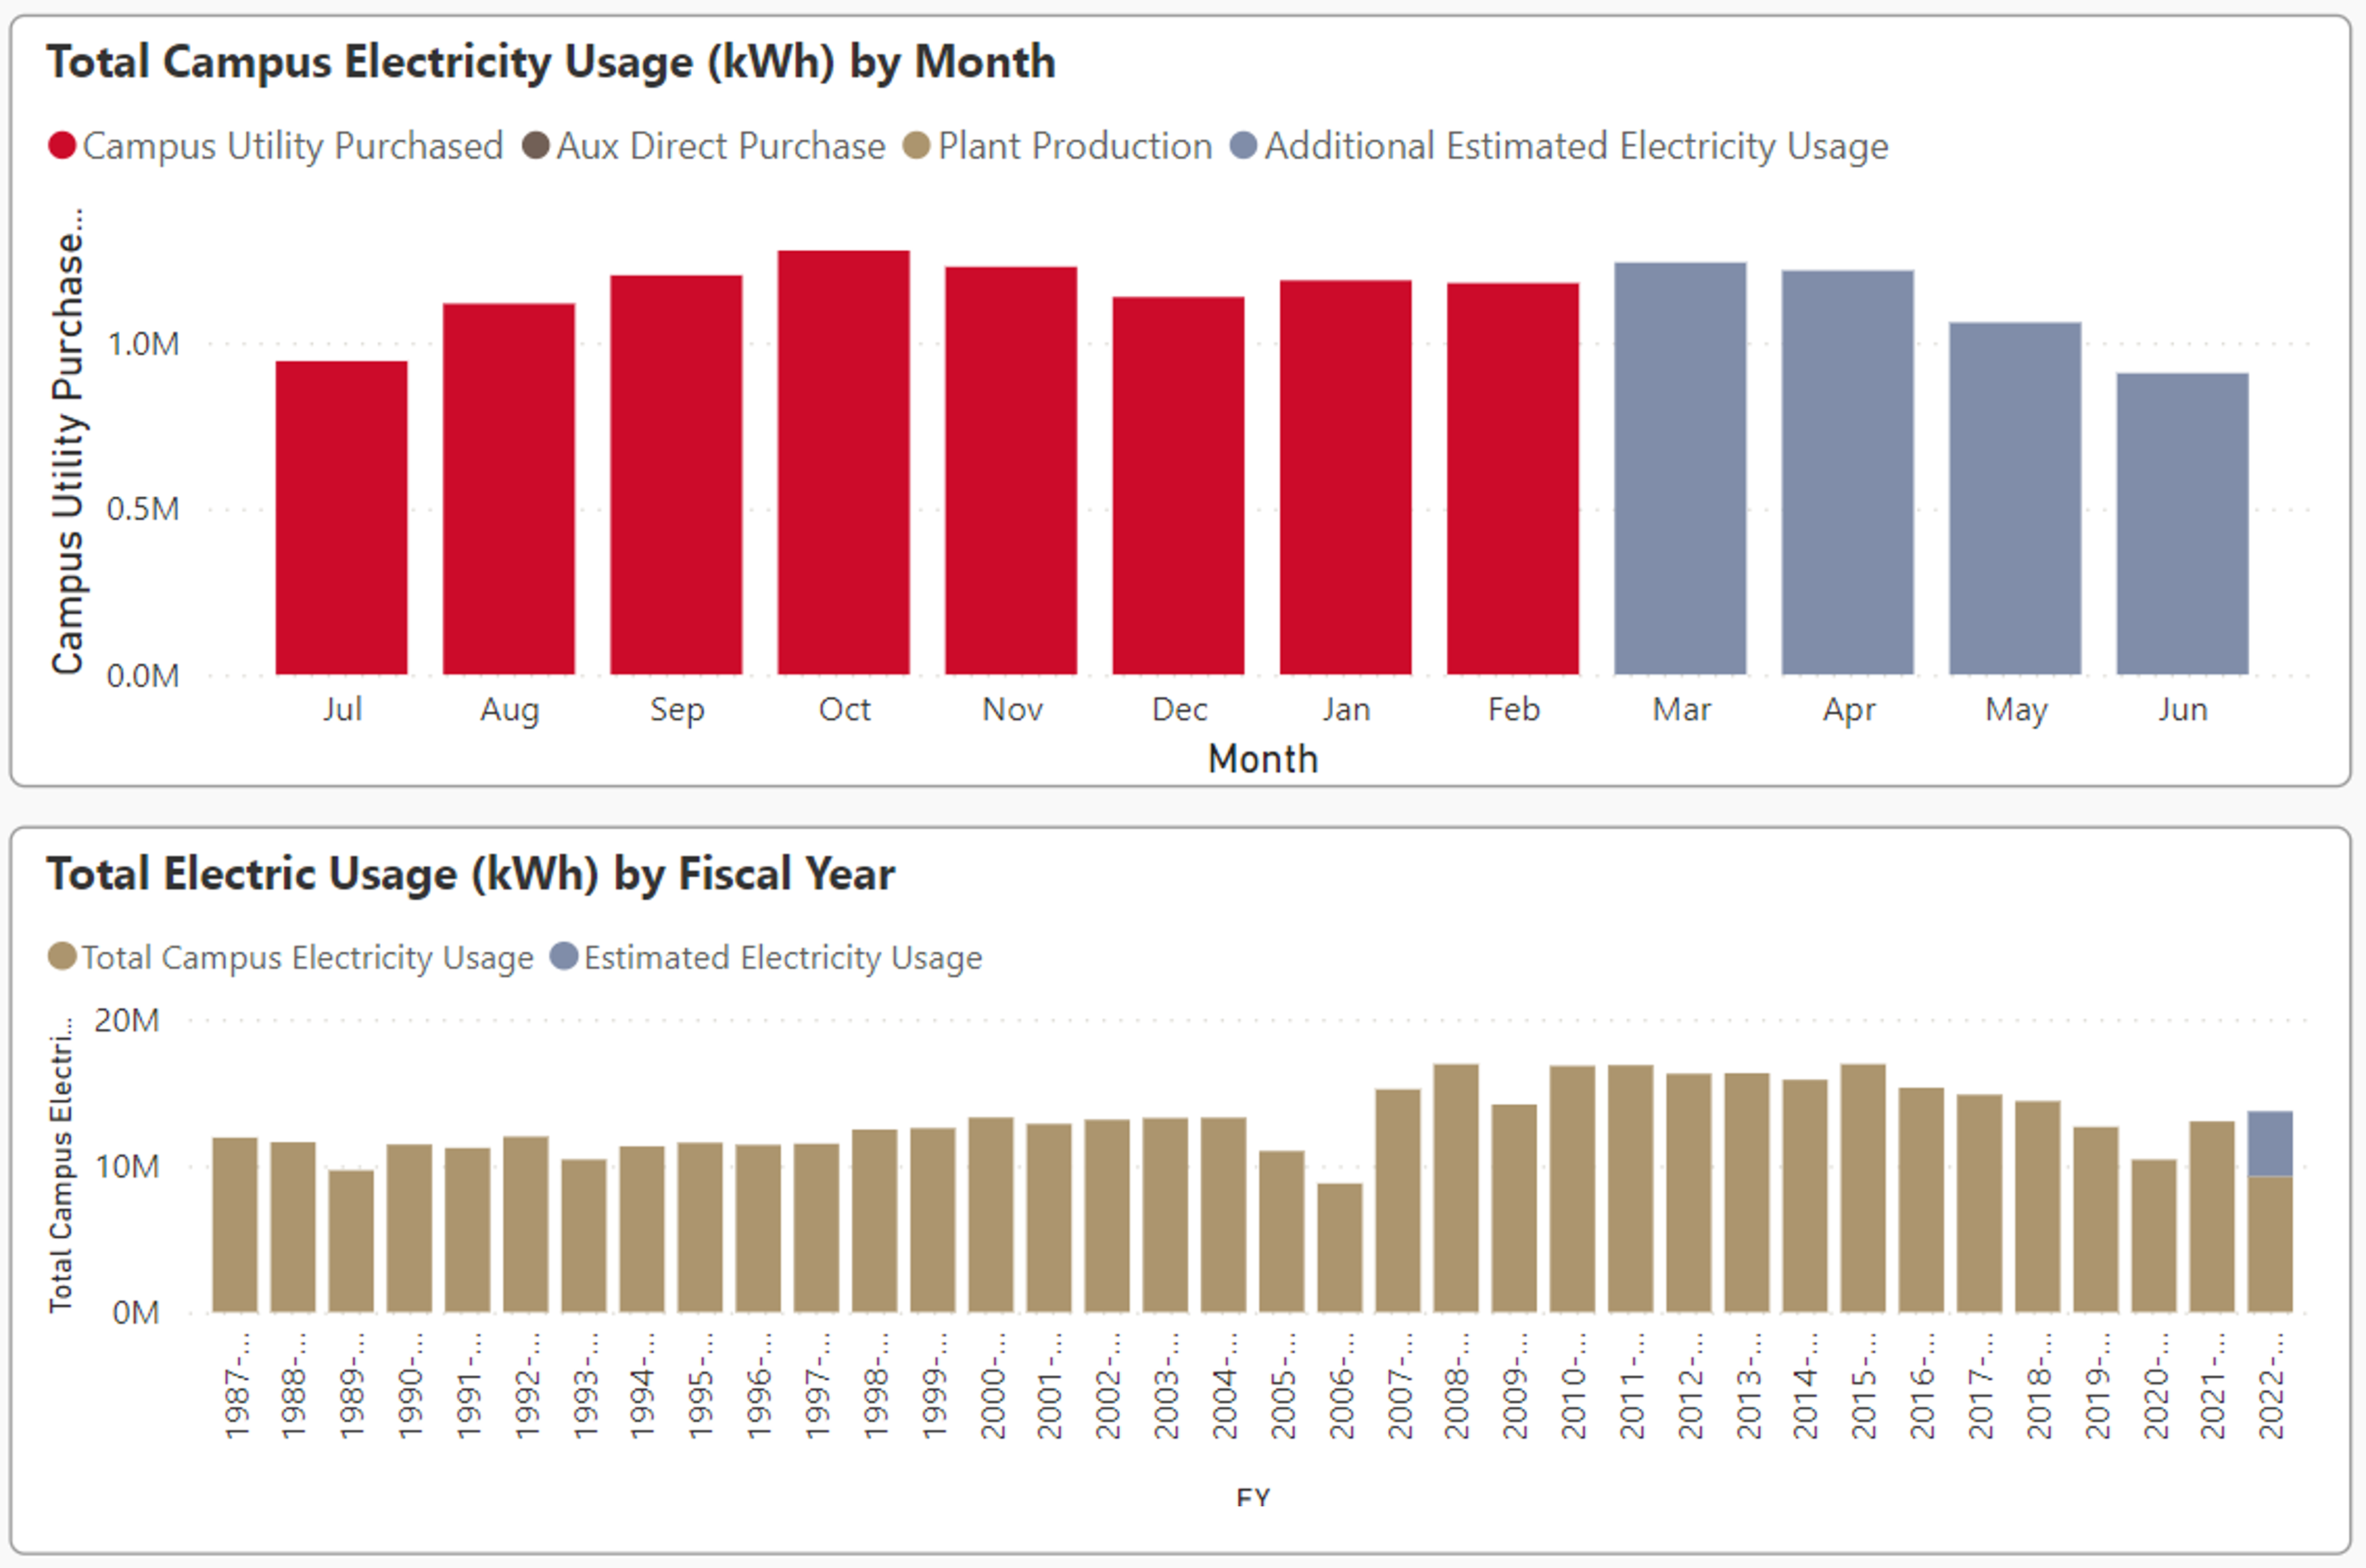 Graphs showing total electricity usage (kWh) by month and by fiscal year